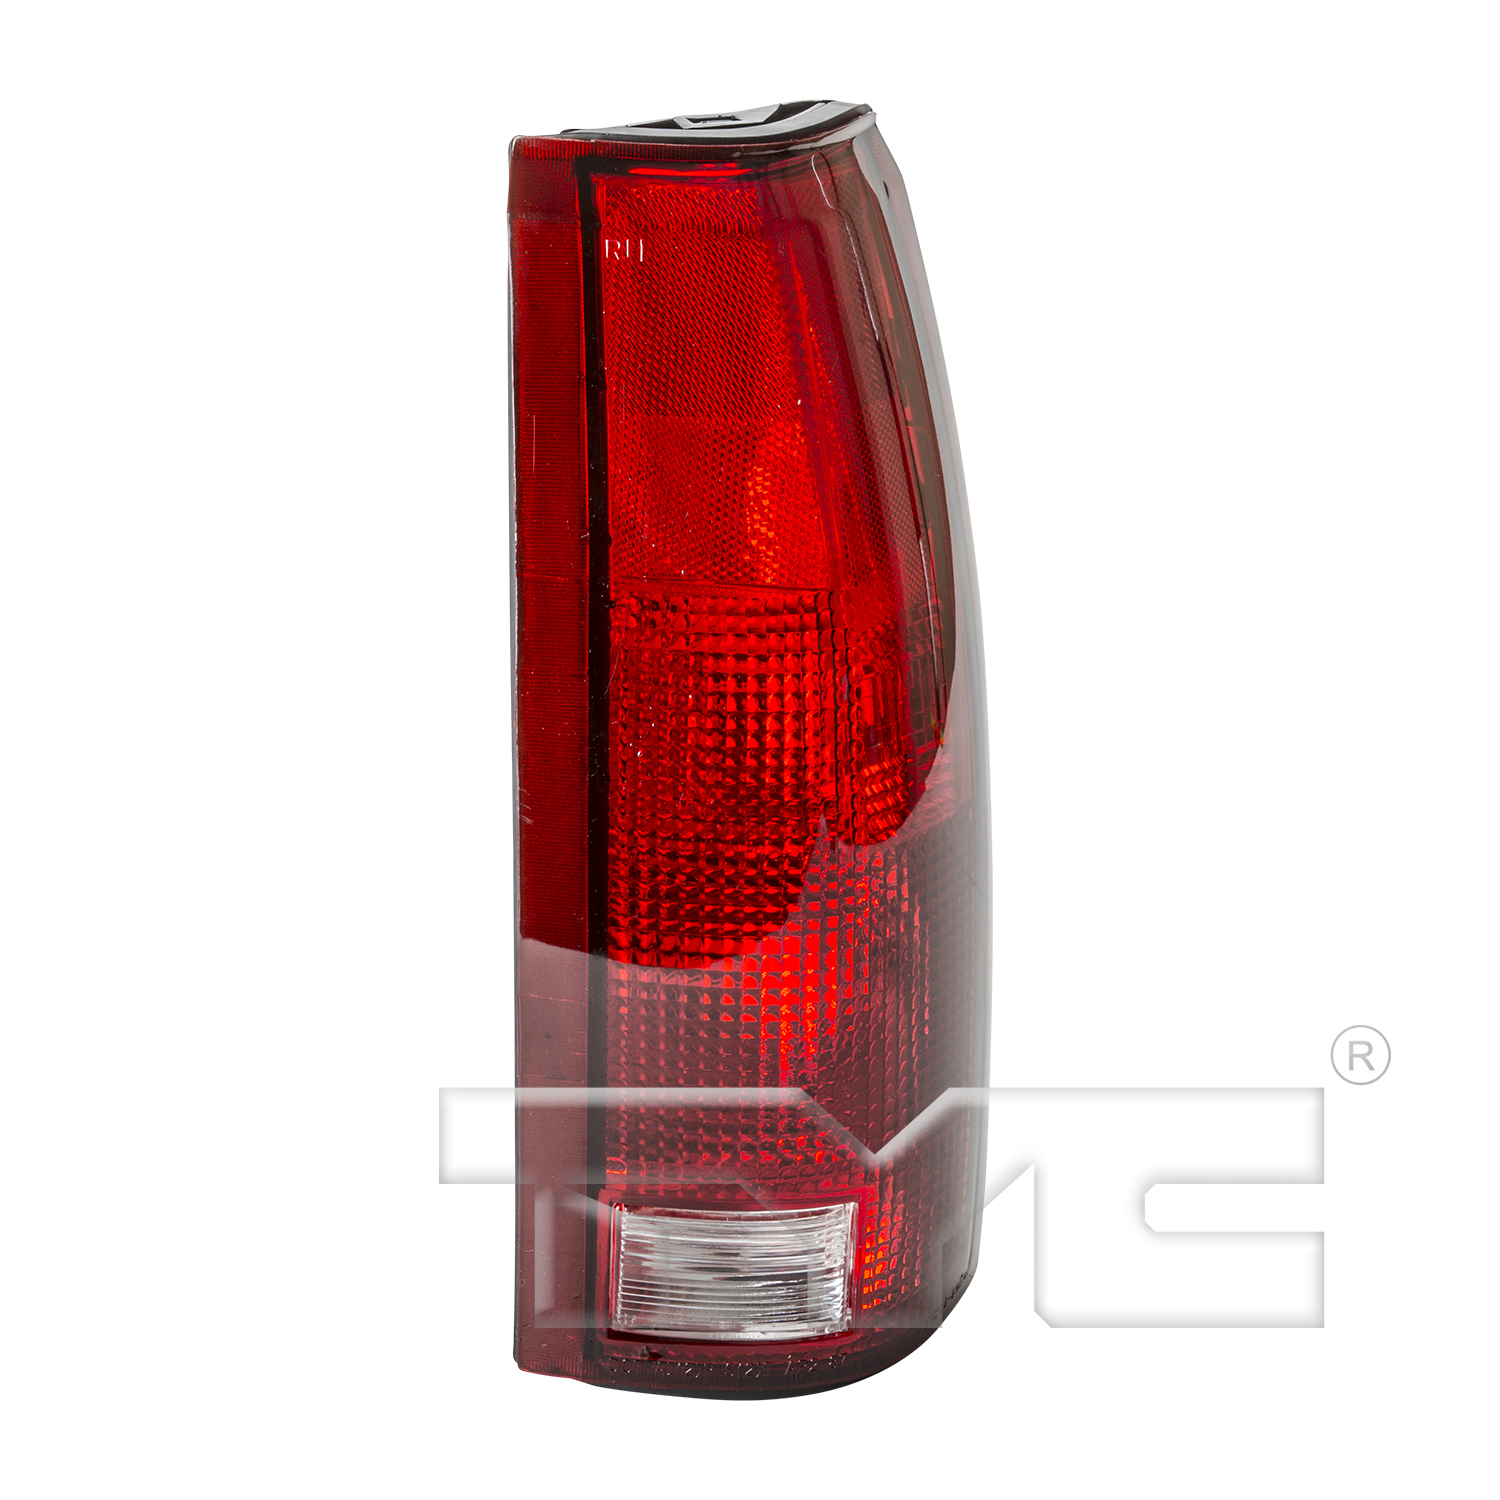 Aftermarket TAILLIGHTS for CHEVROLET - K1500, K1500,88-99,RT Taillamp lens